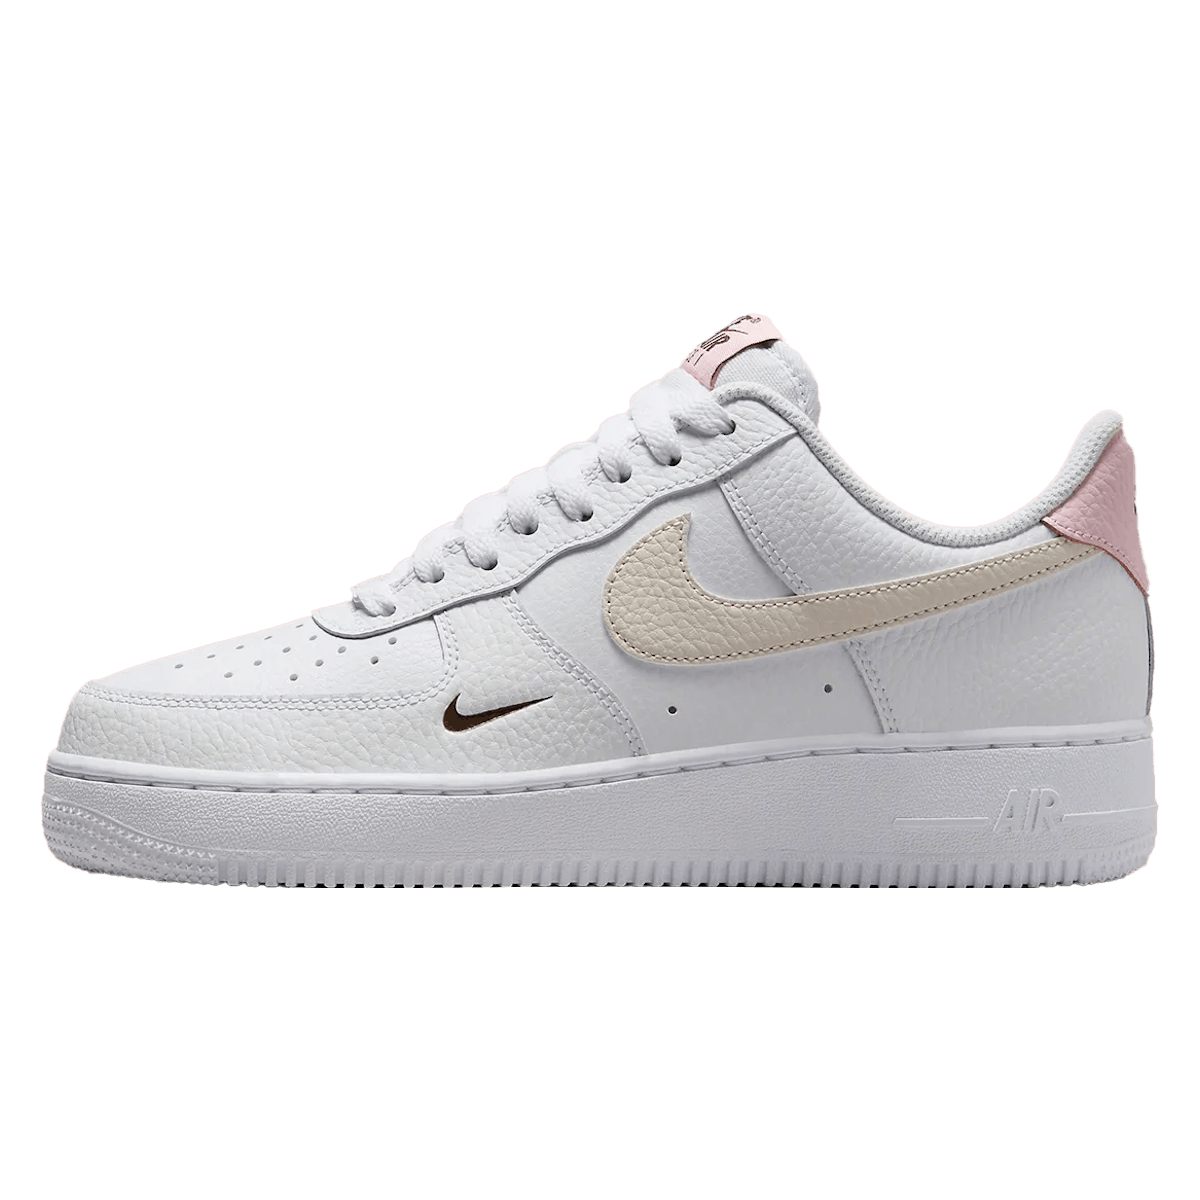 Nike Air Force 1 Low "Tumbled Pink"